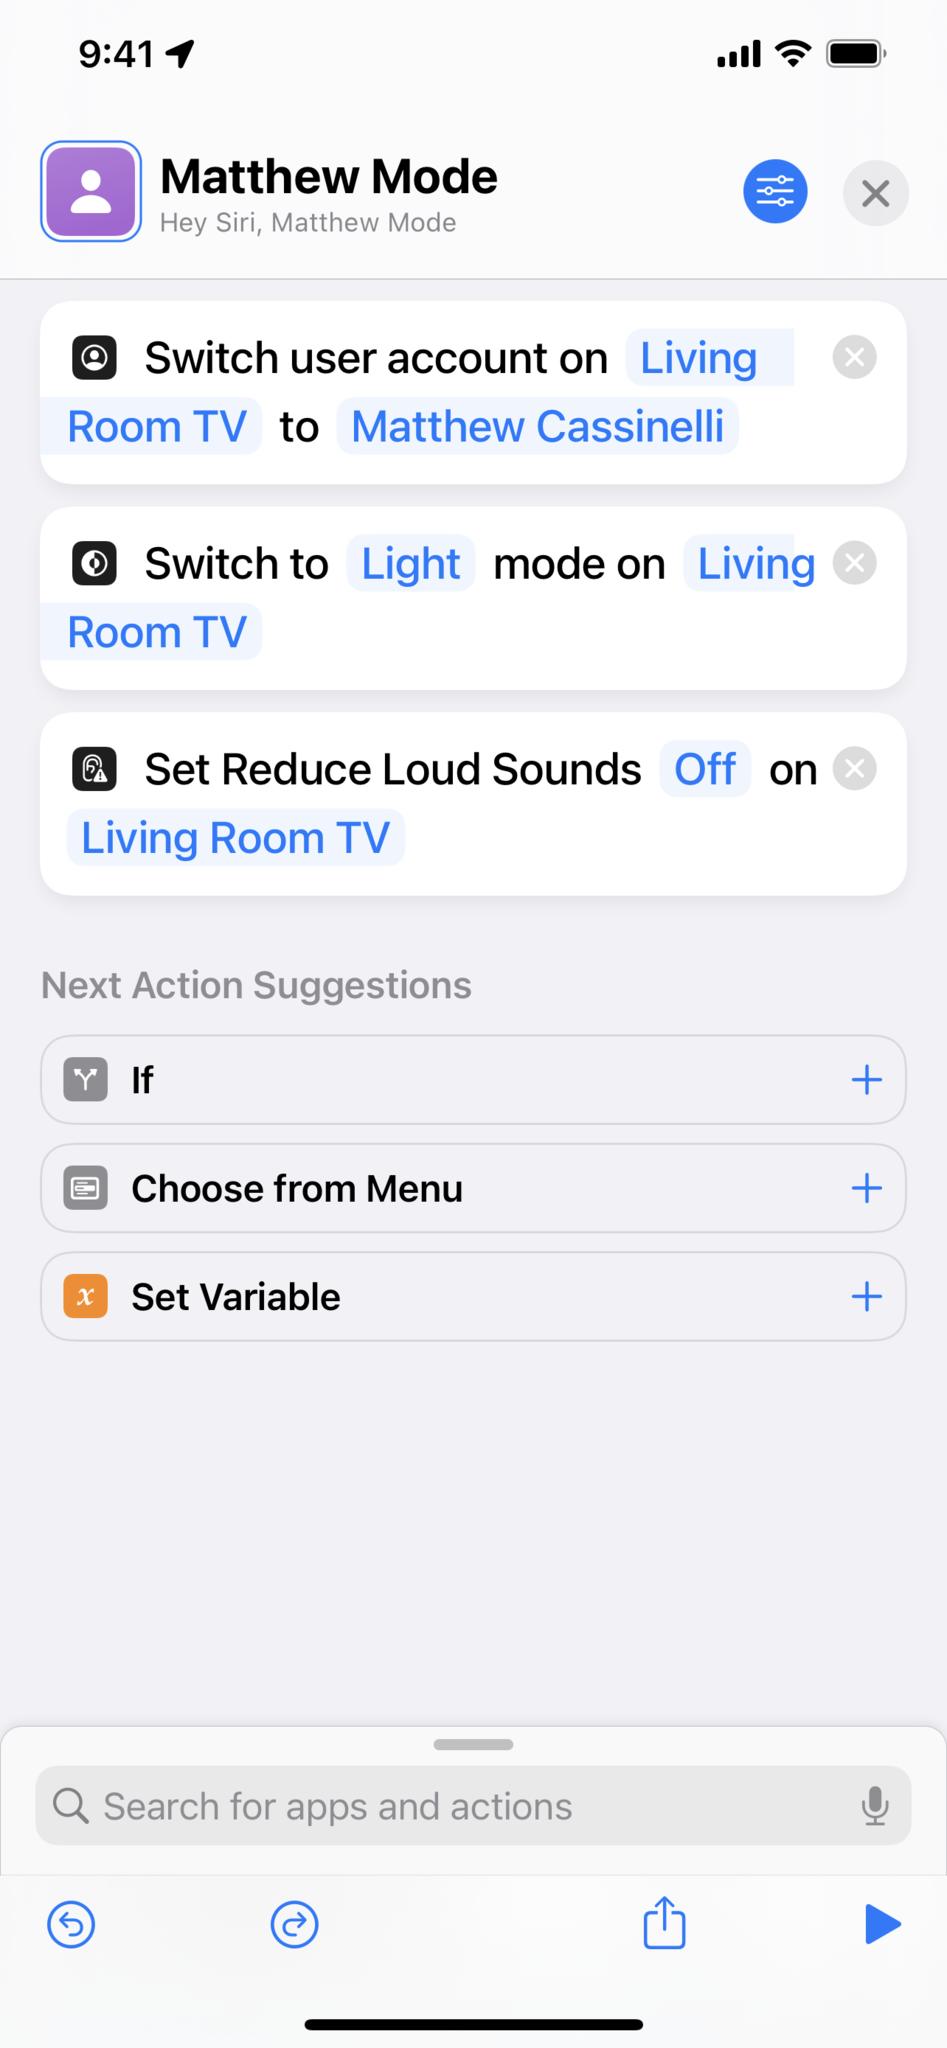 Screenshot of "Matthew Mode" again, adding Set Reduce Loud Sounds set to Off to make sure that setting is not turned on.